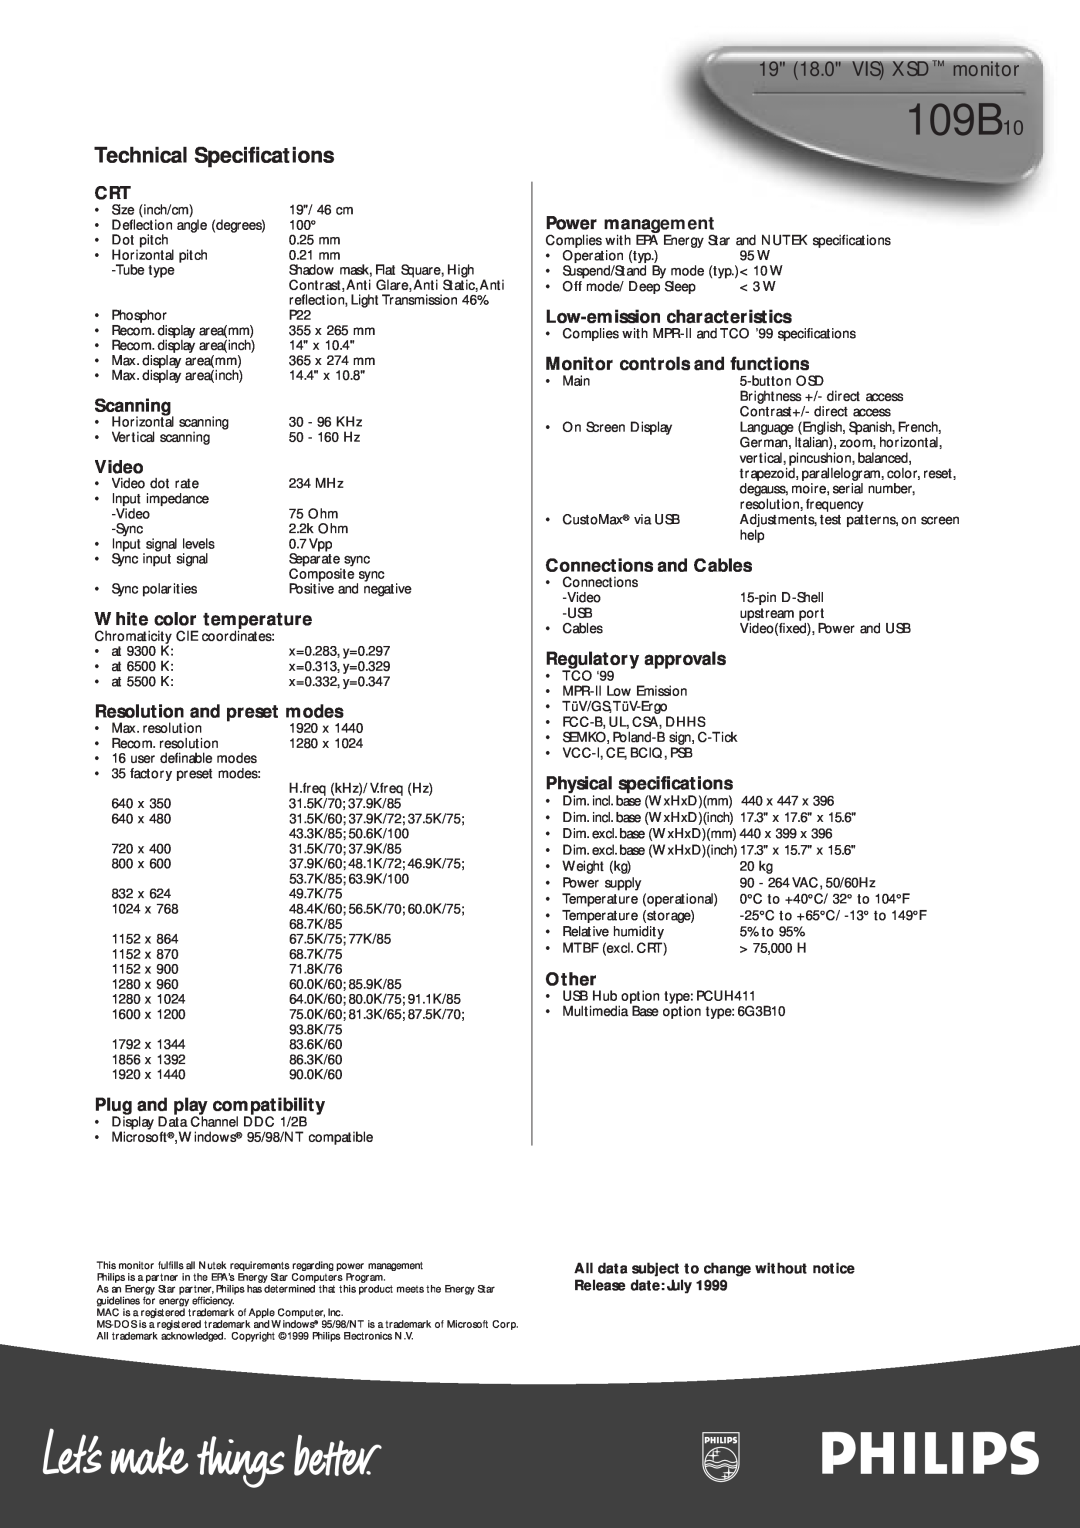 Philips 109B10 manual Technical Specifications, 19 18.0 VIS XSD monitor 